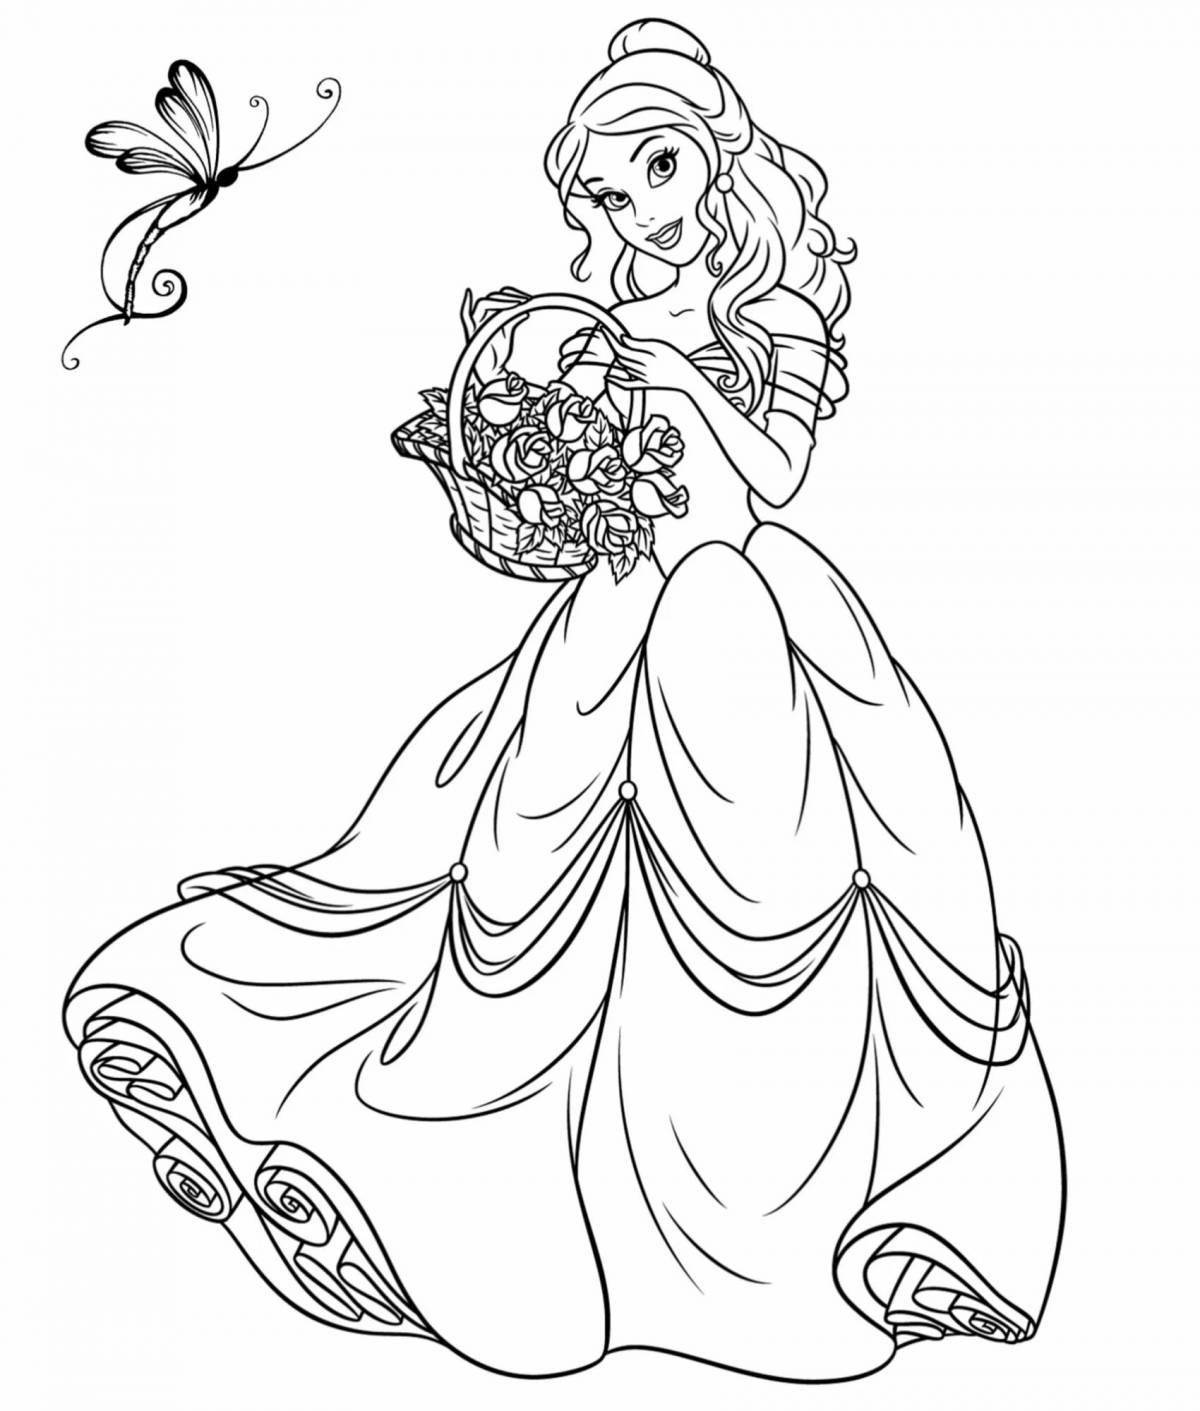 Outstanding underwear coloring page for kids